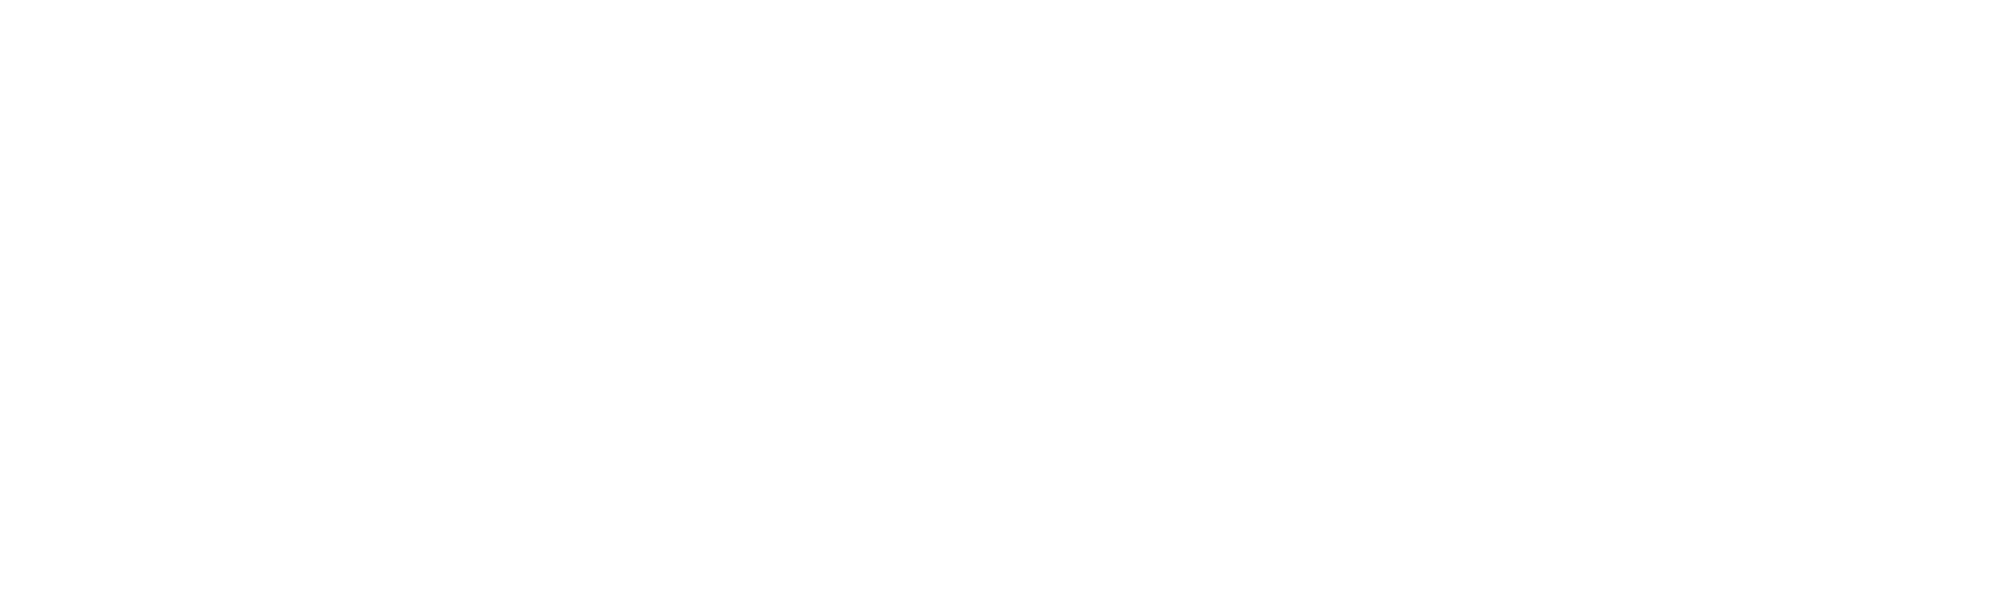 Five sequential mathematical equations in white text on a black background, representing a series of weighted sums with biases